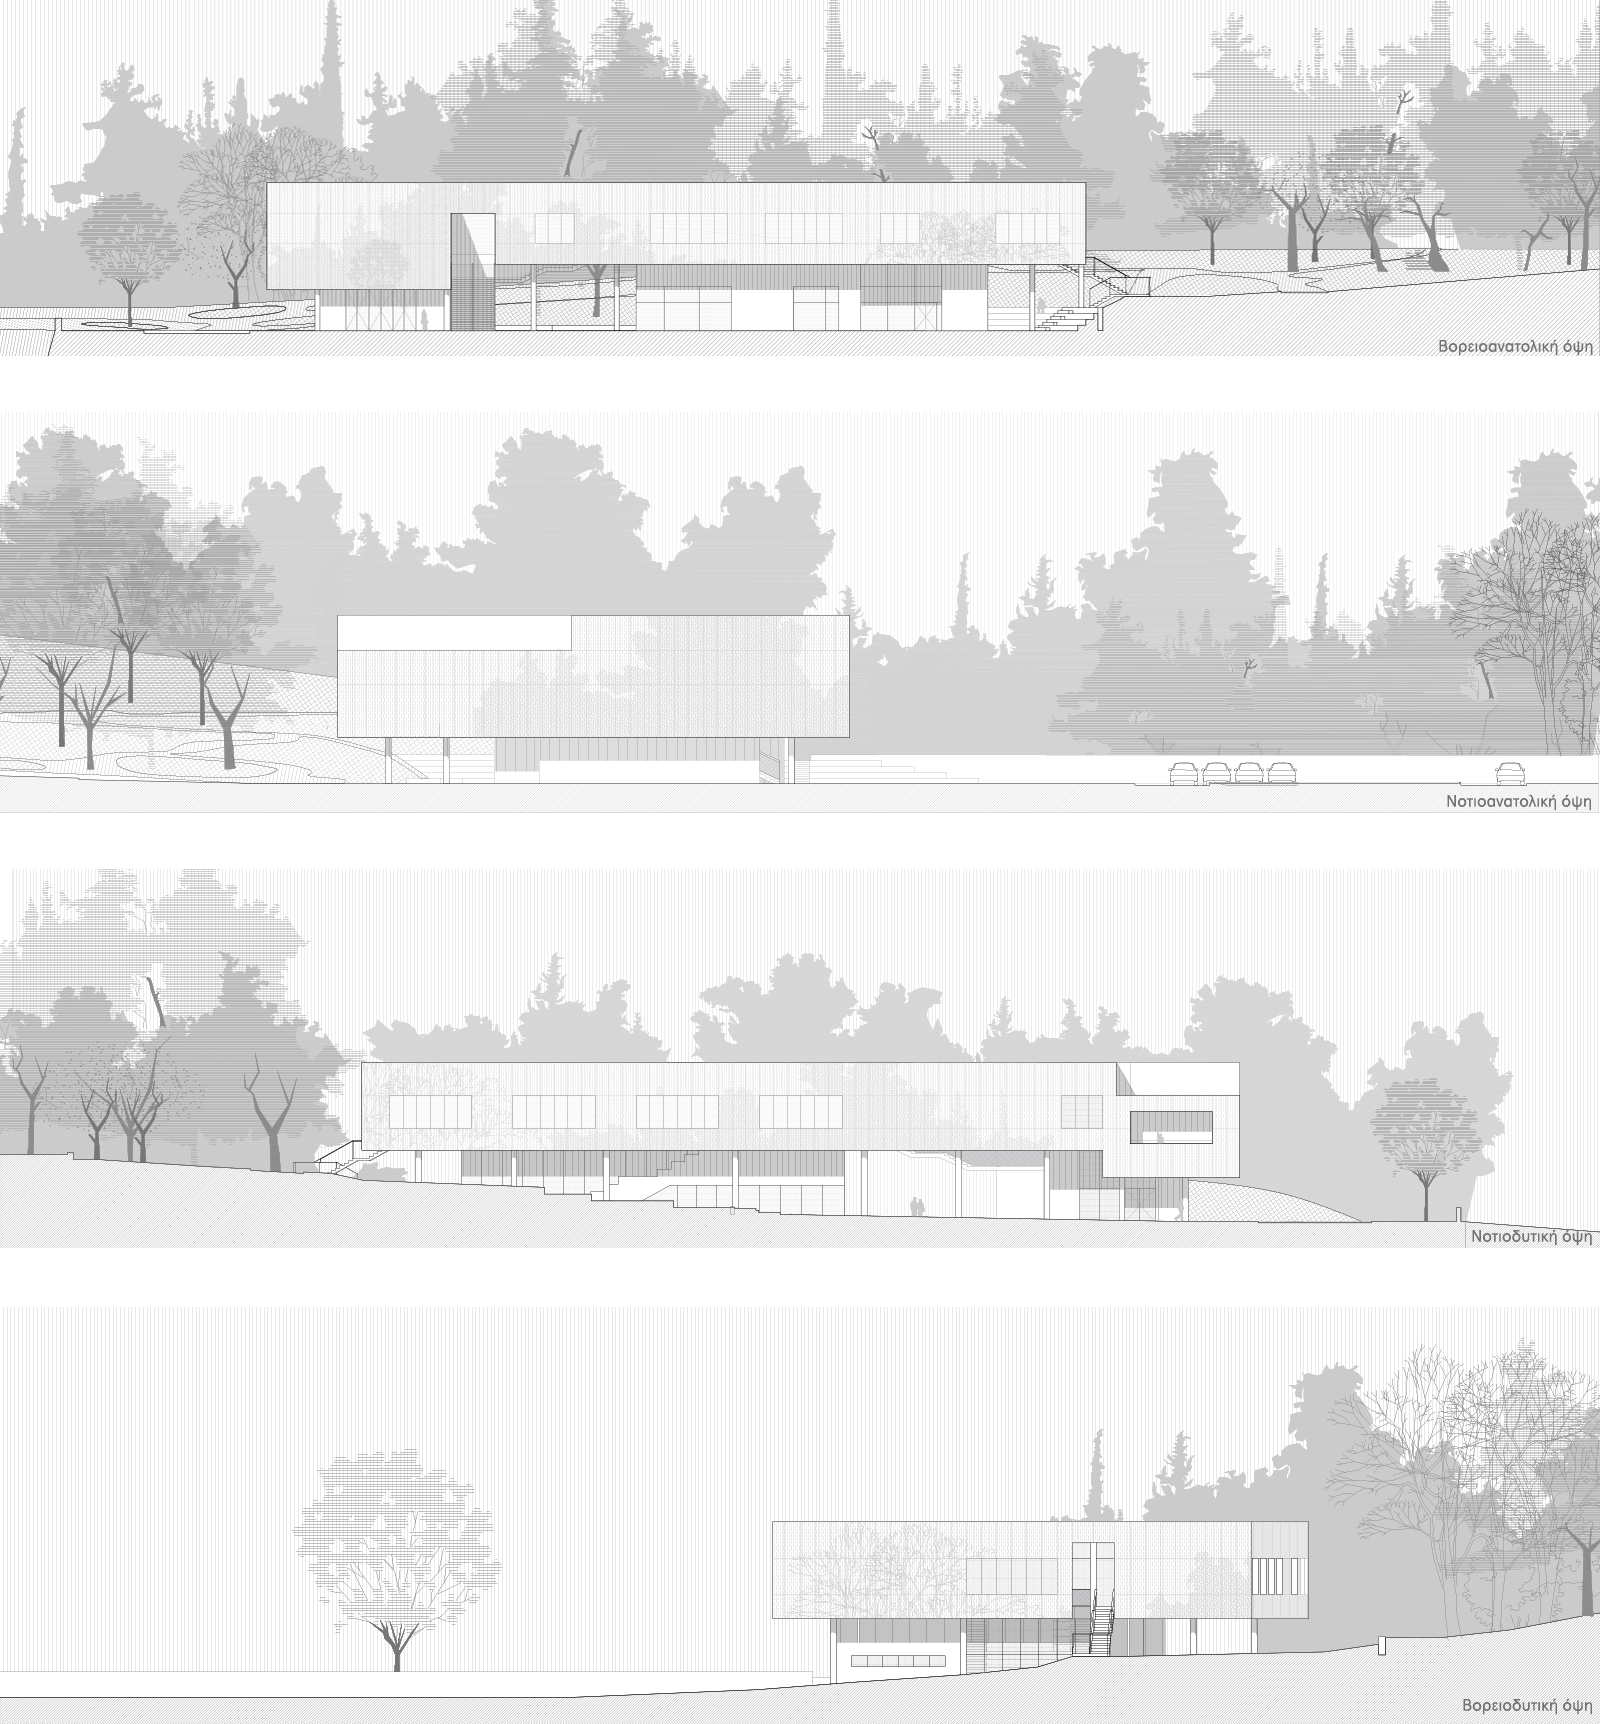 Archisearch “Art is in the air” - The D.Daskalopoulos Arts Building | Proposal for the Architectural Competition by Agapi Proimou, Lefteris Michaloutsos and Virginia Malami